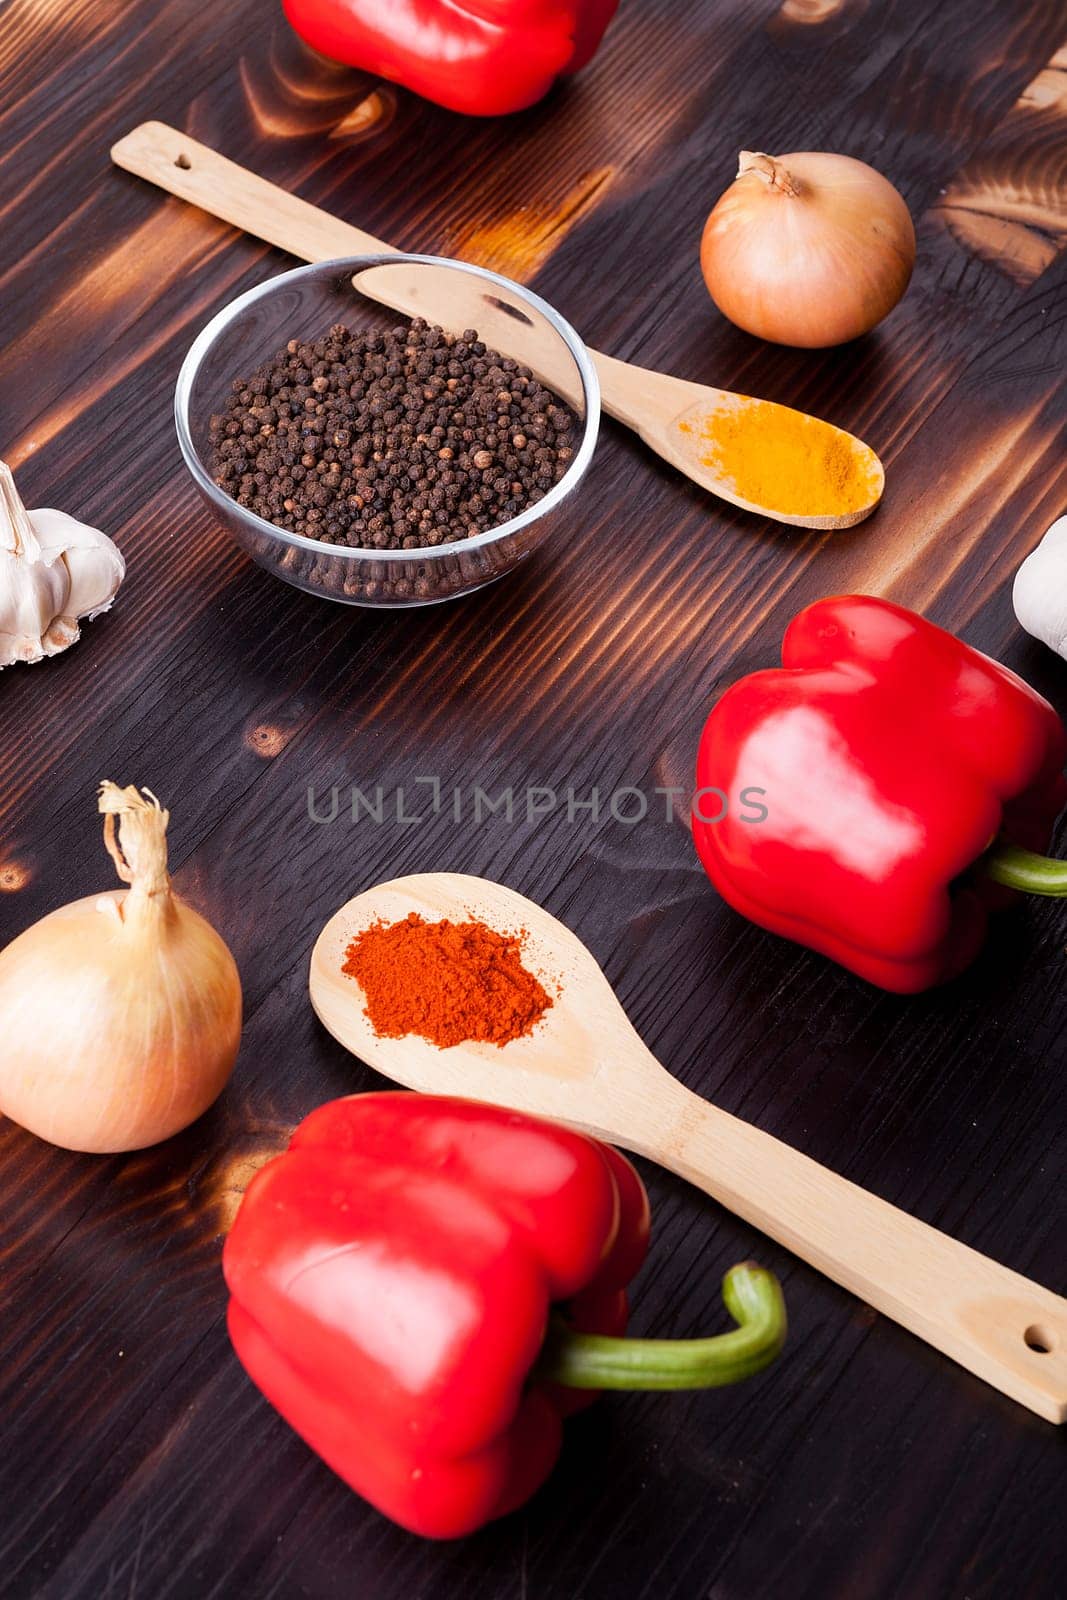 Fresh delicious vegetables and black pepper and other spices on burned wooden board